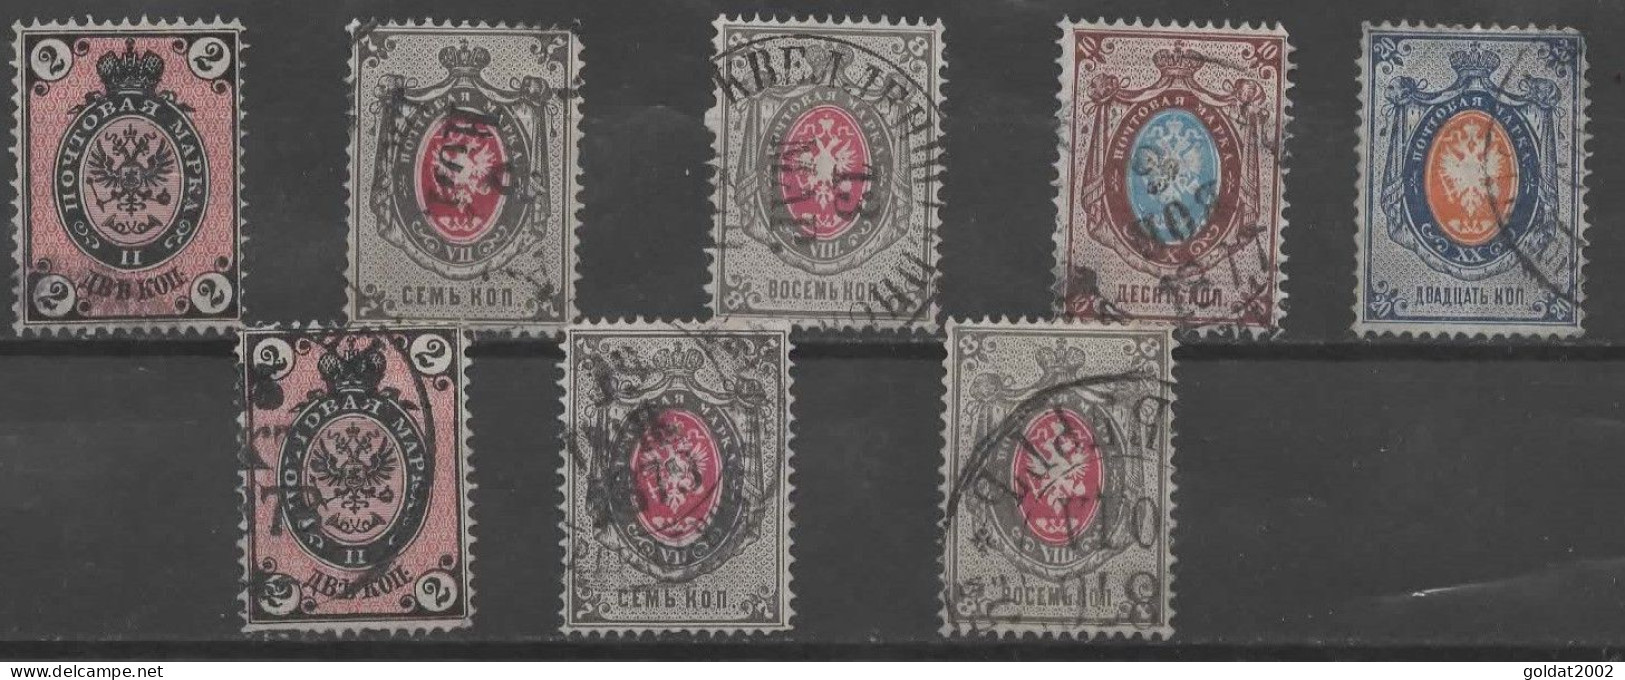 Imperial Russia 1875,Sc # 26-30+Sc #26a,27b,28a,Horiz.+Vertic.laid Paper,Used . - Used Stamps